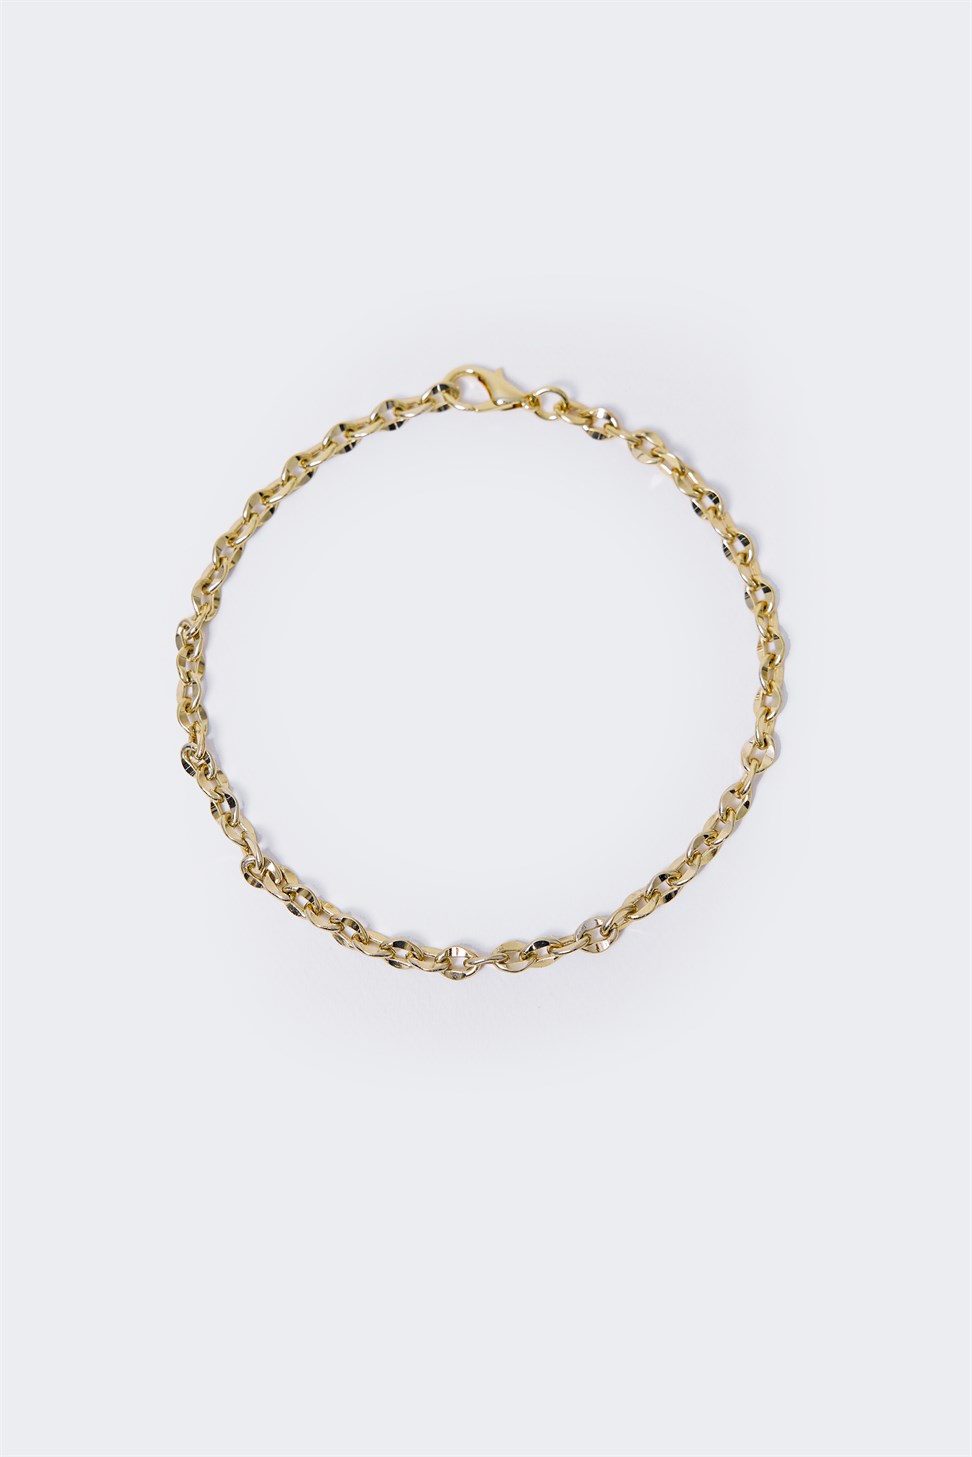 Chain Gold Womens Necklace